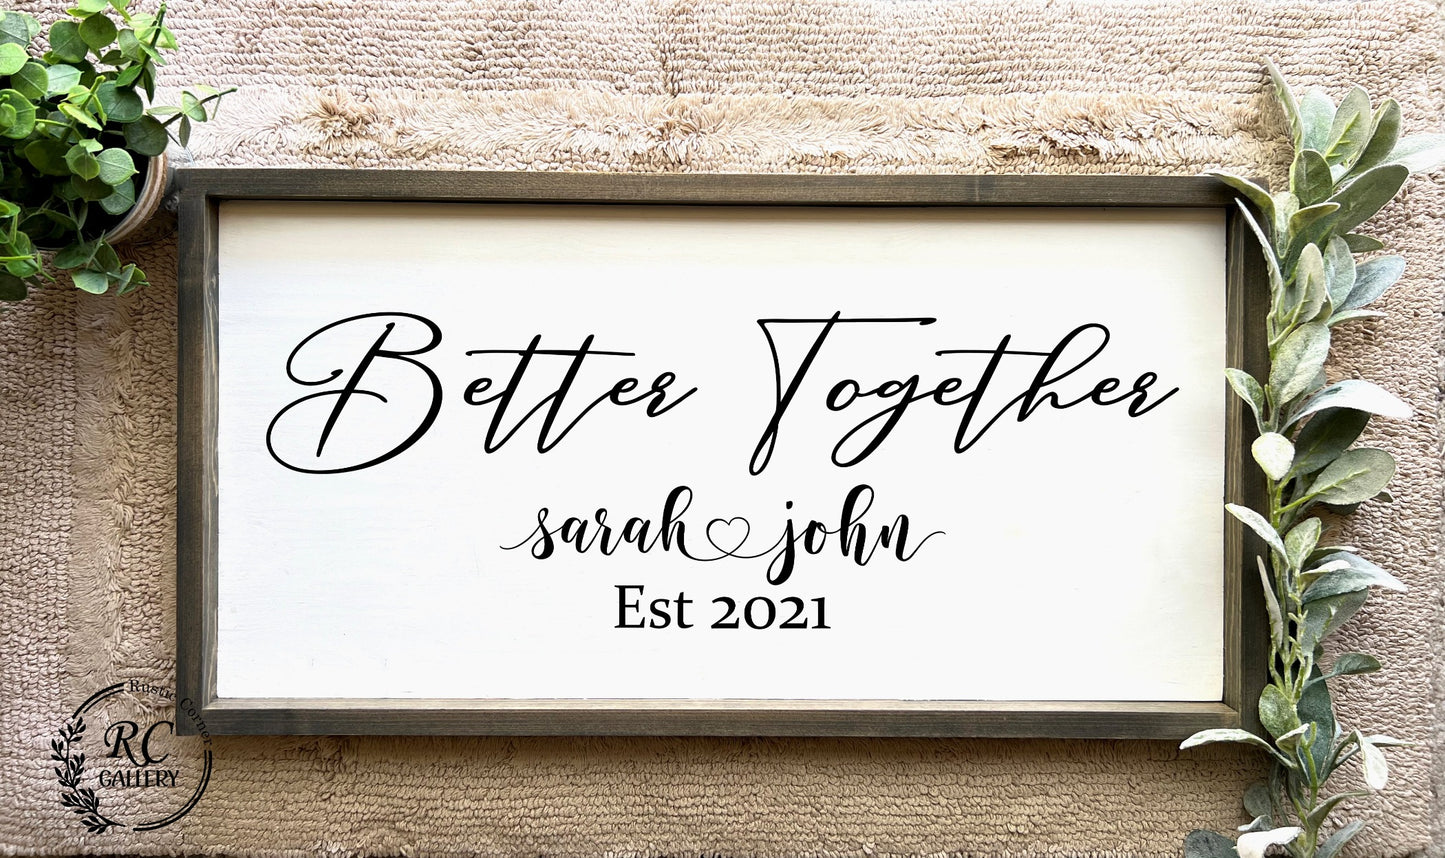 Better together, personalized wood sign.